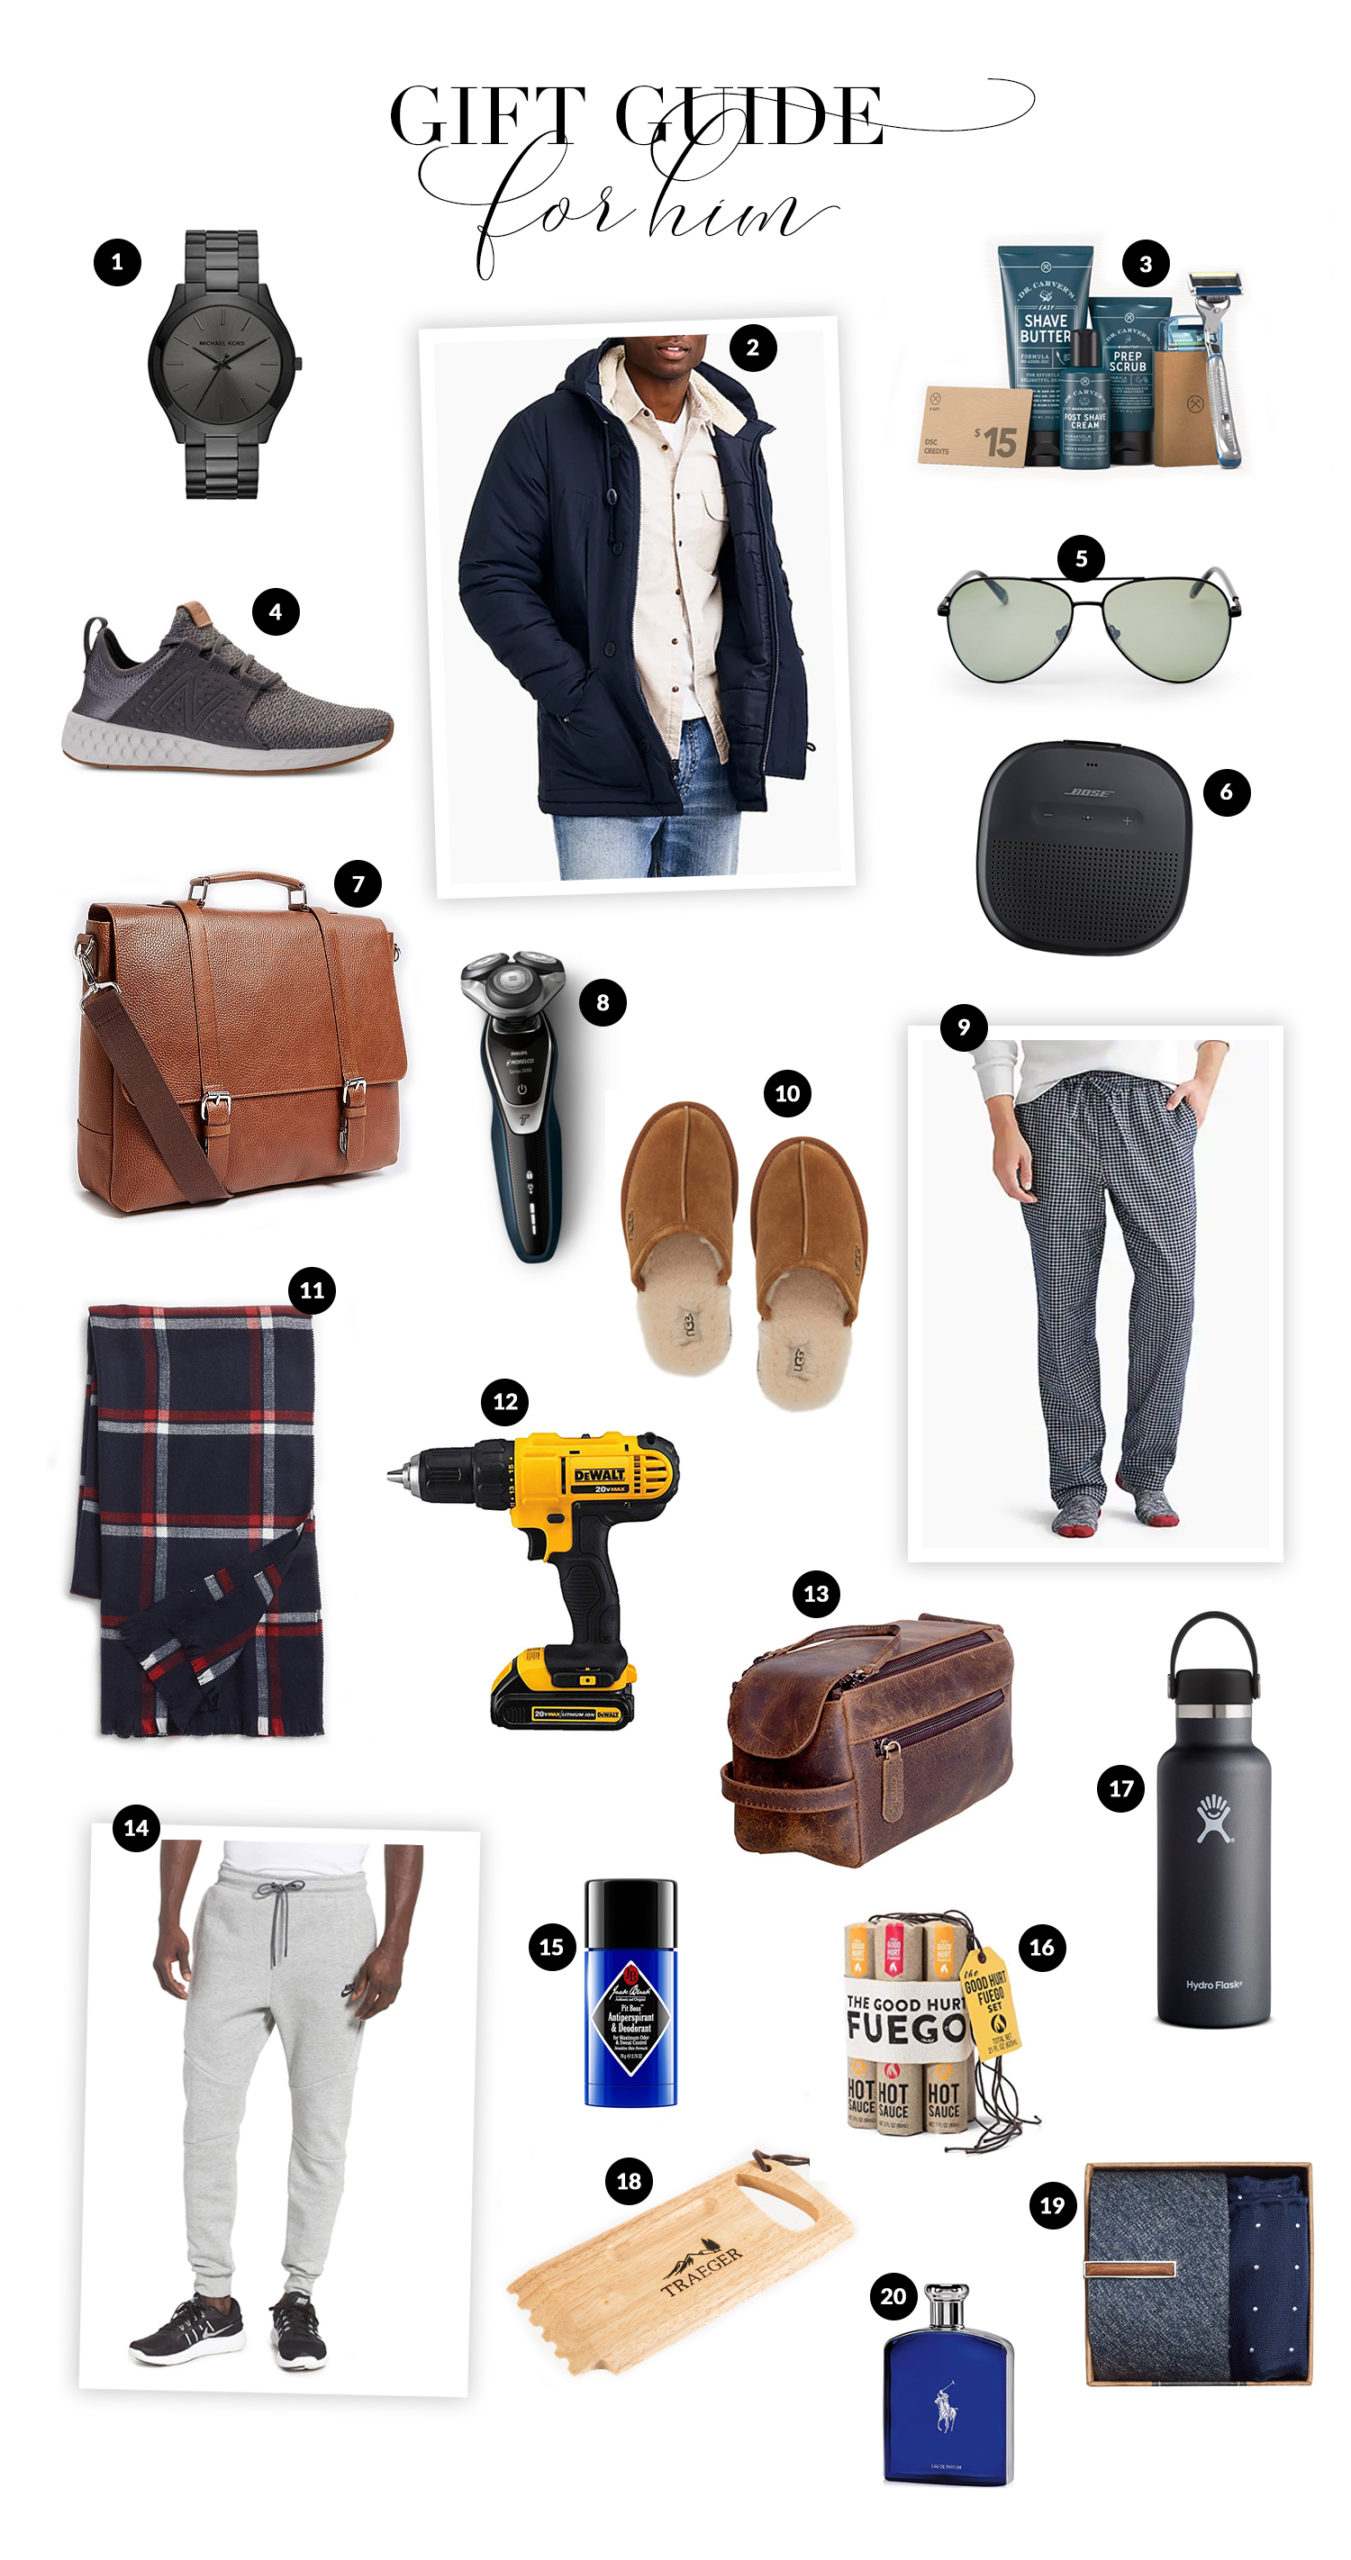 Gift Guide for Him with Haus of Layne. Our top 20 ideas for the realistic budget ranging from $250 down to $15. Catch the ideas now! #GiftGuide2018 #GiftGuides2018 #GiftGuideForHim #GiftGuideForDad #GiftIdeasForMen #GiftIdeasForDad